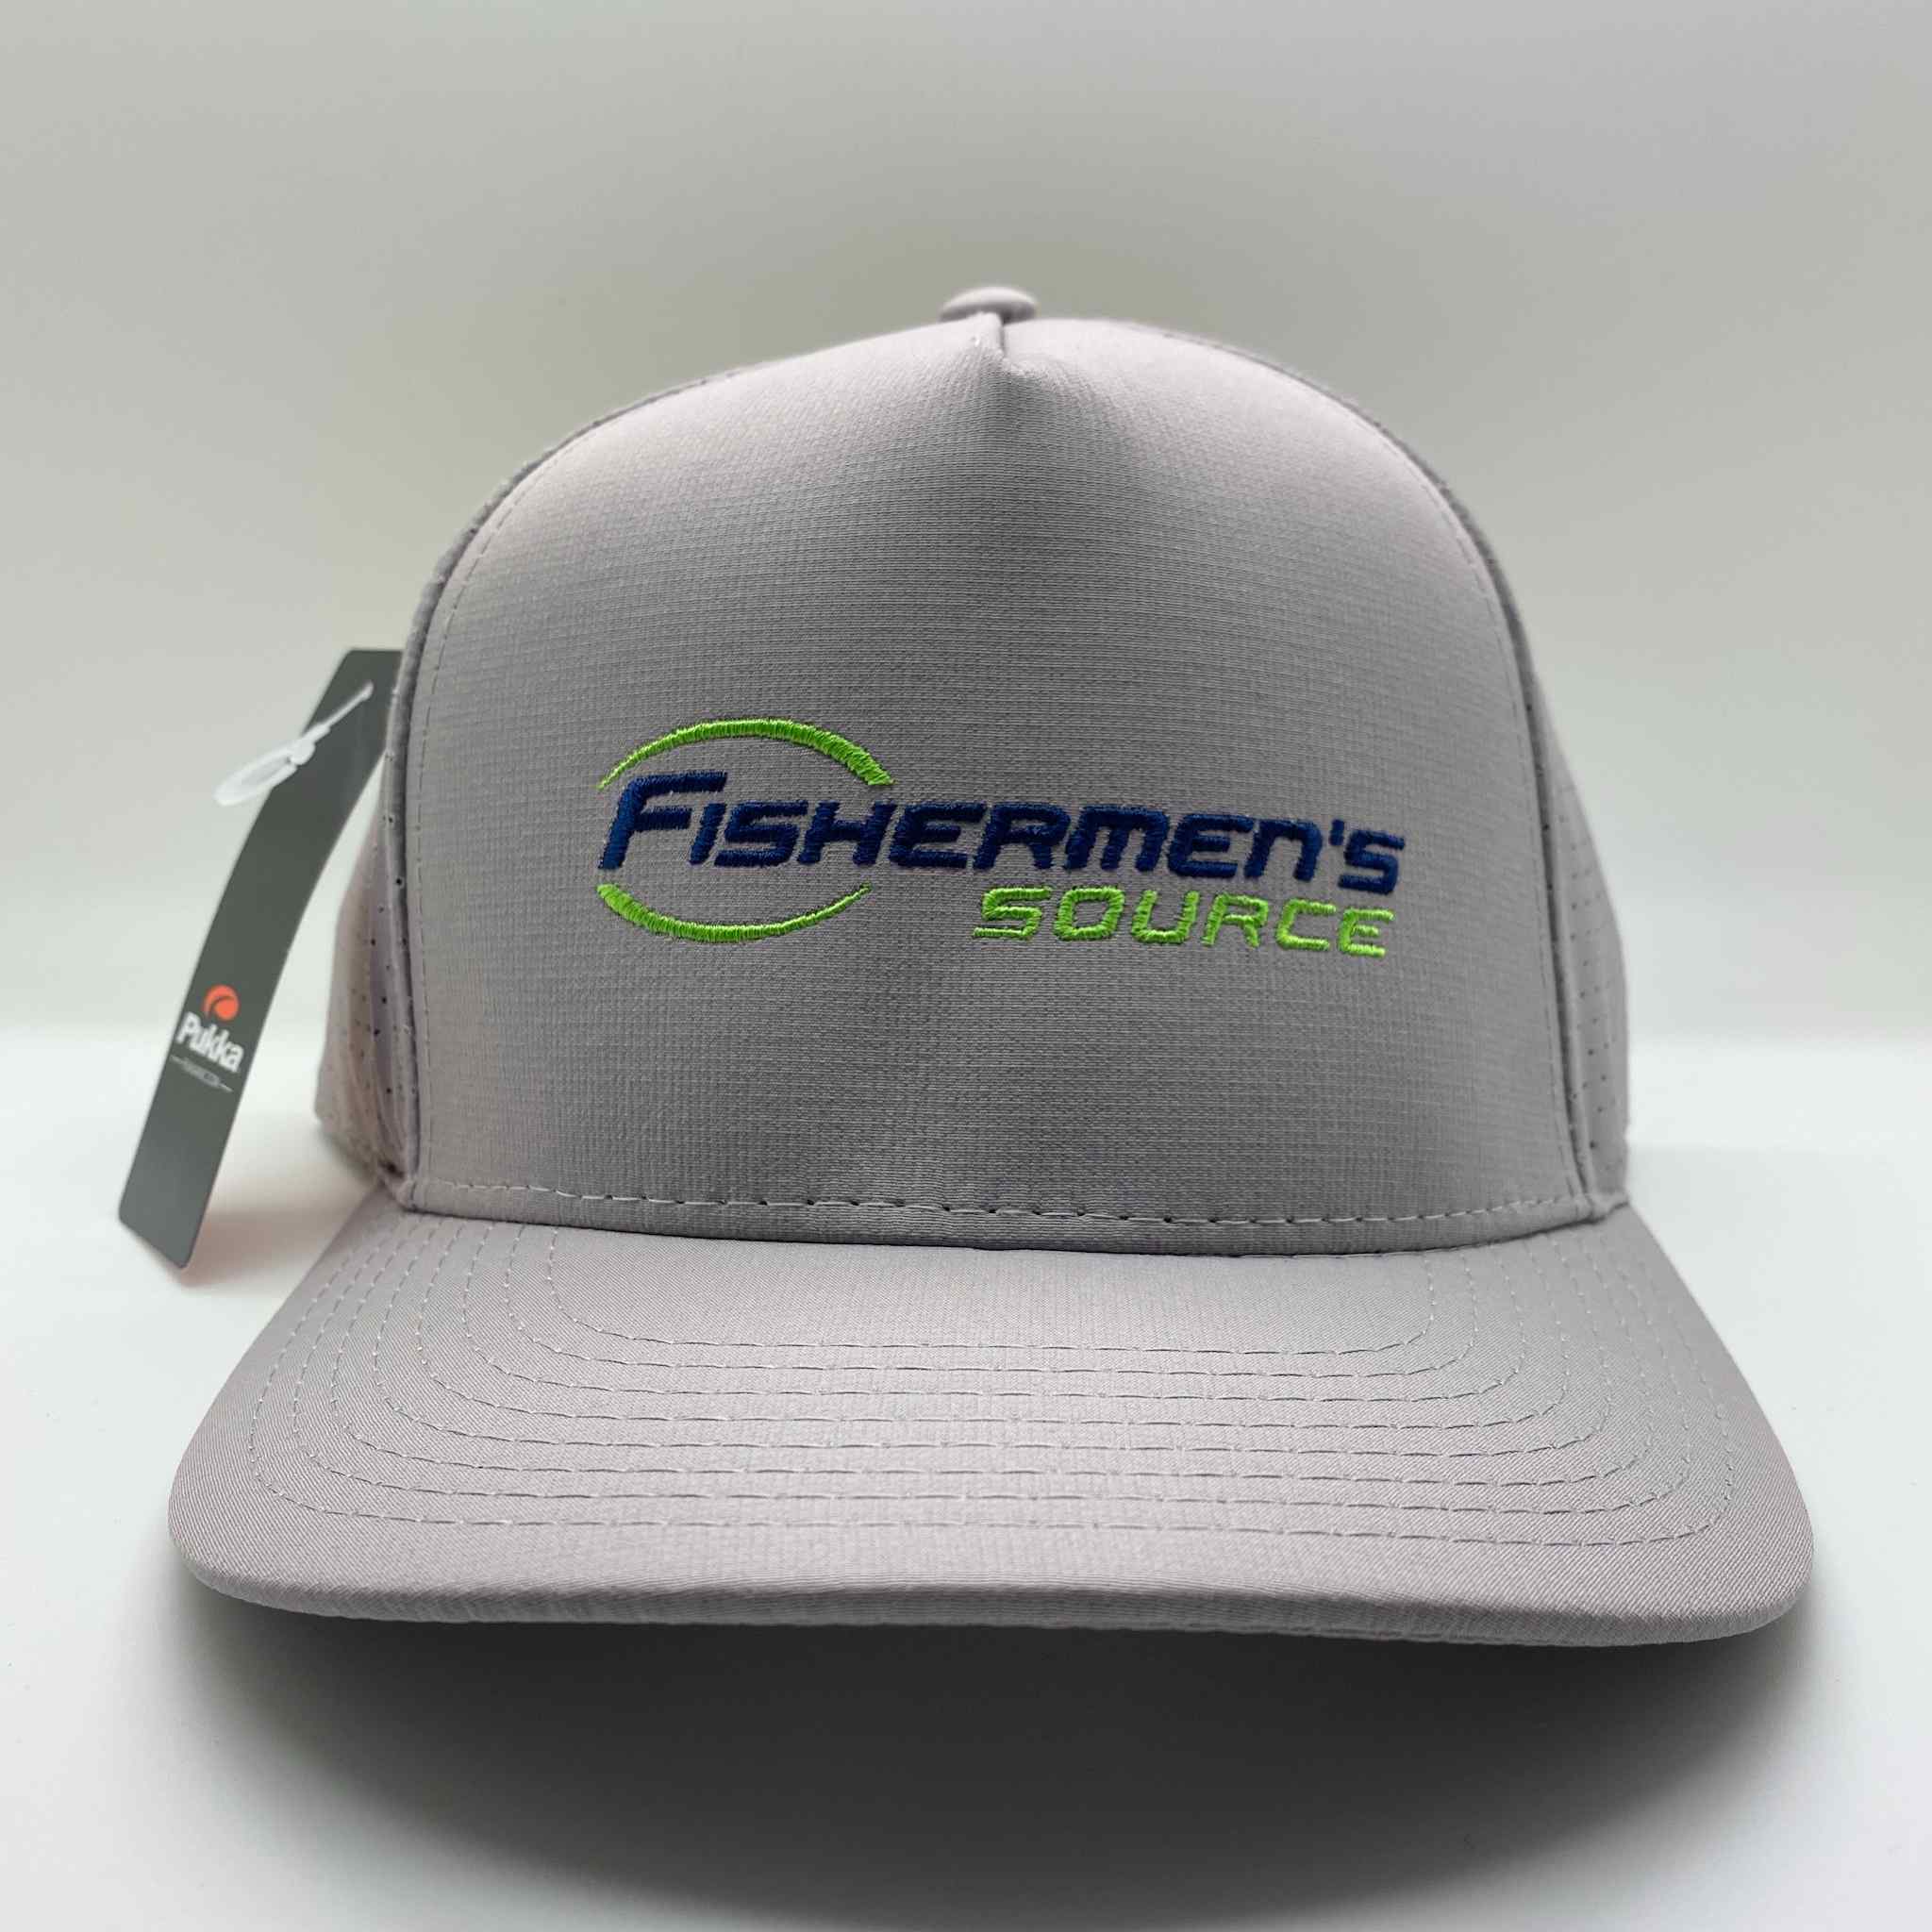 Fishermen's Source Performance Hat high crown fit.